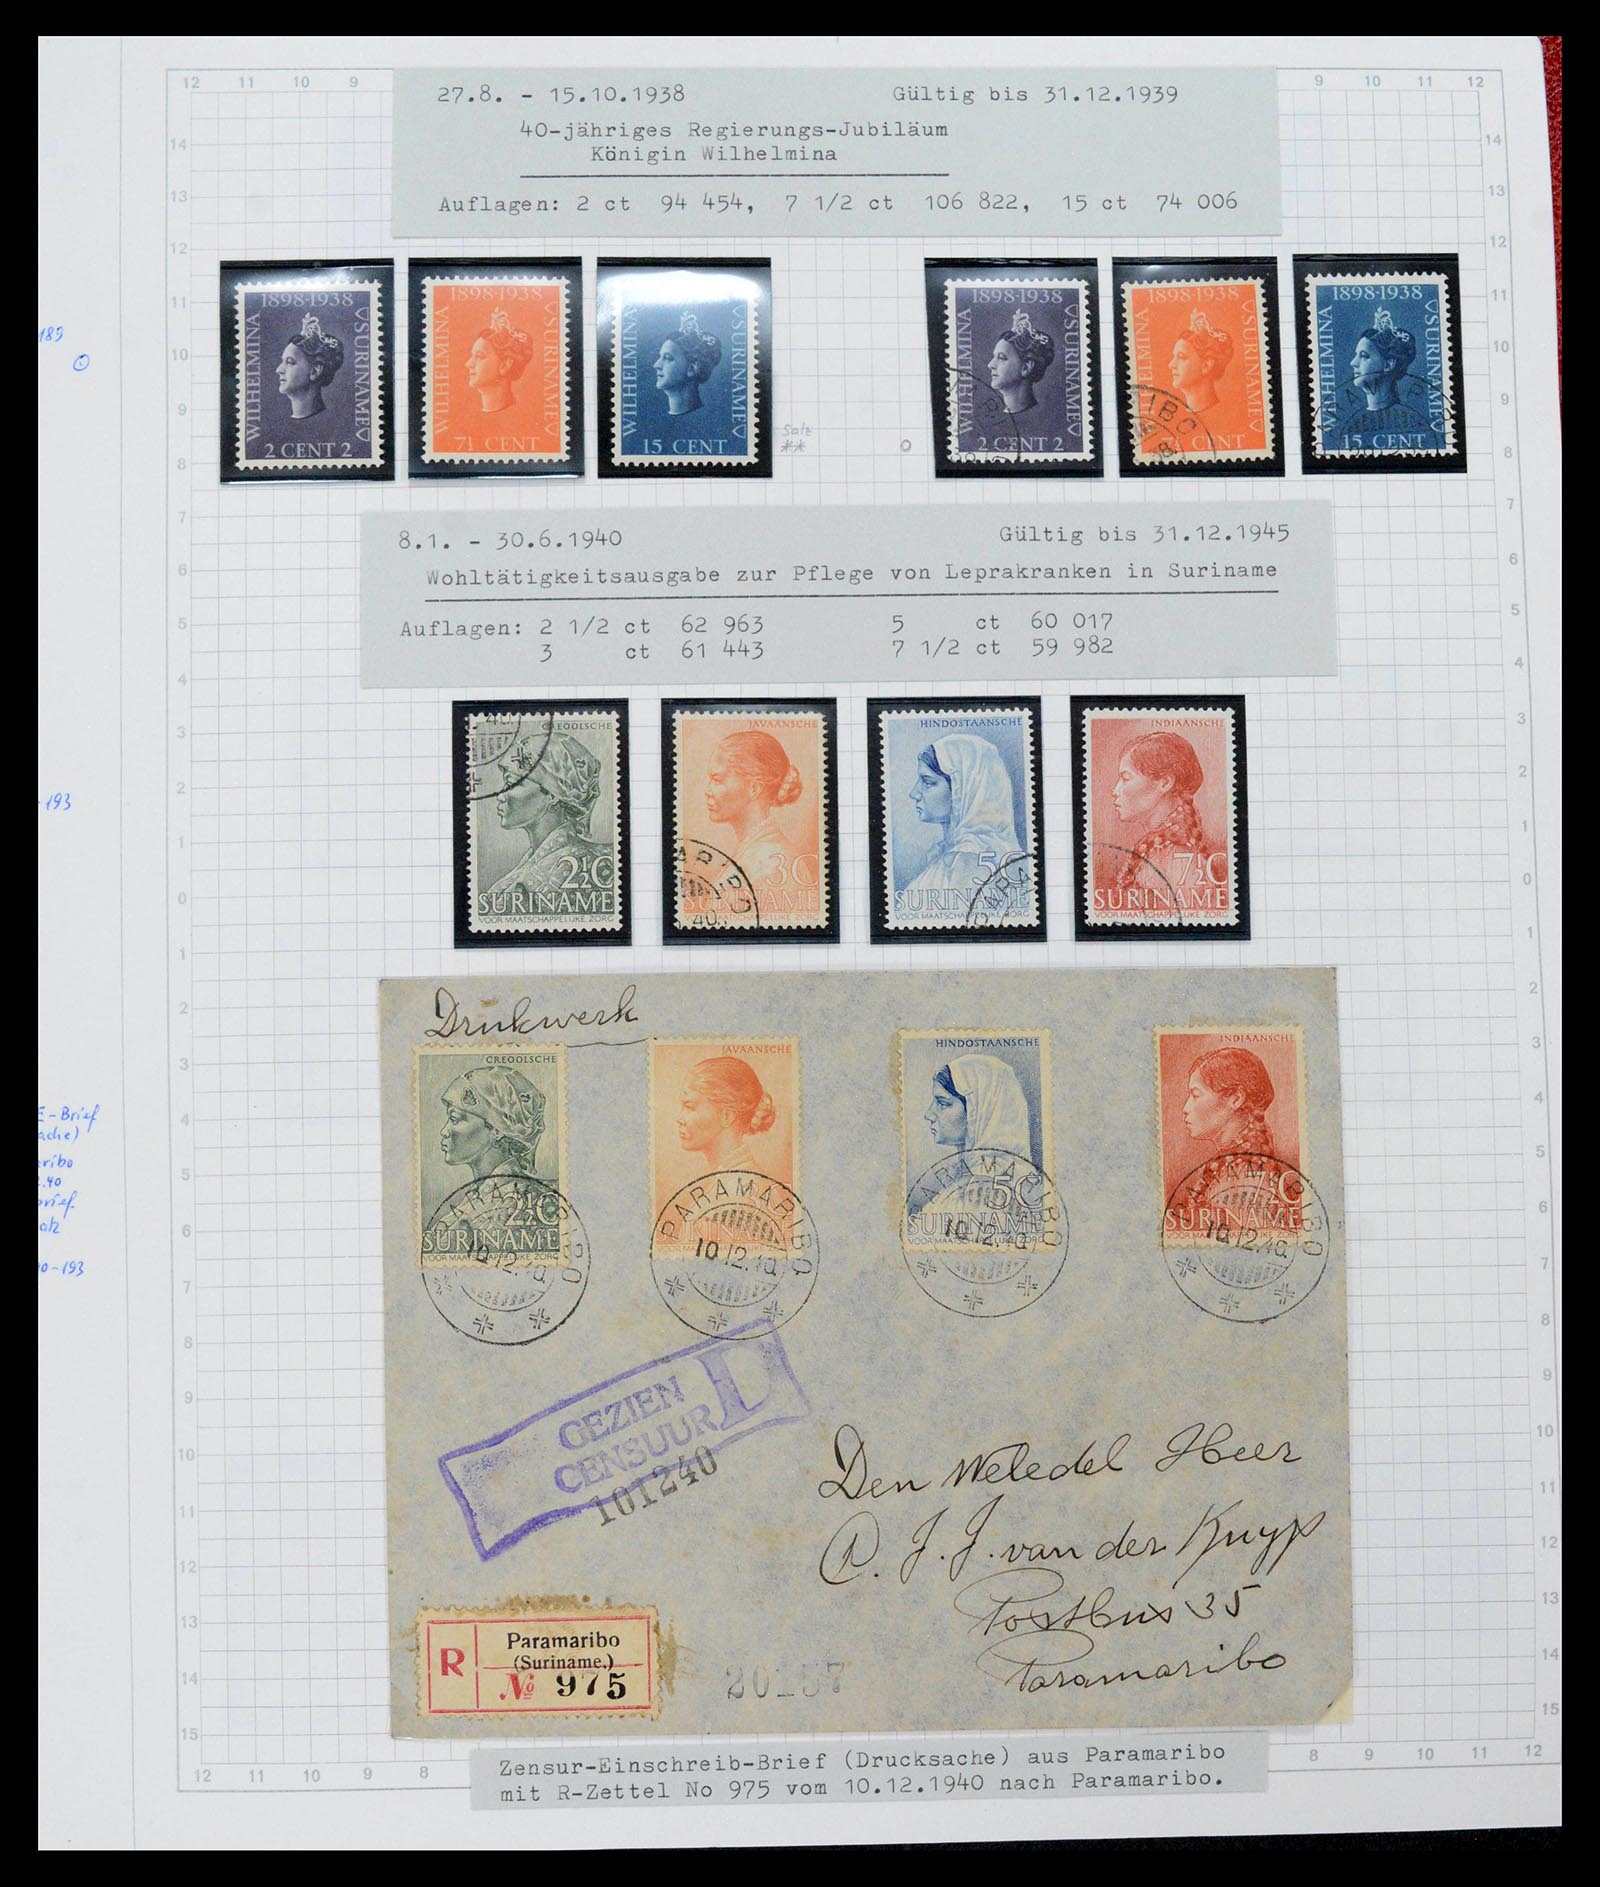 39373 0020 - Stamp collection 39373 Suriname 1873-1975.